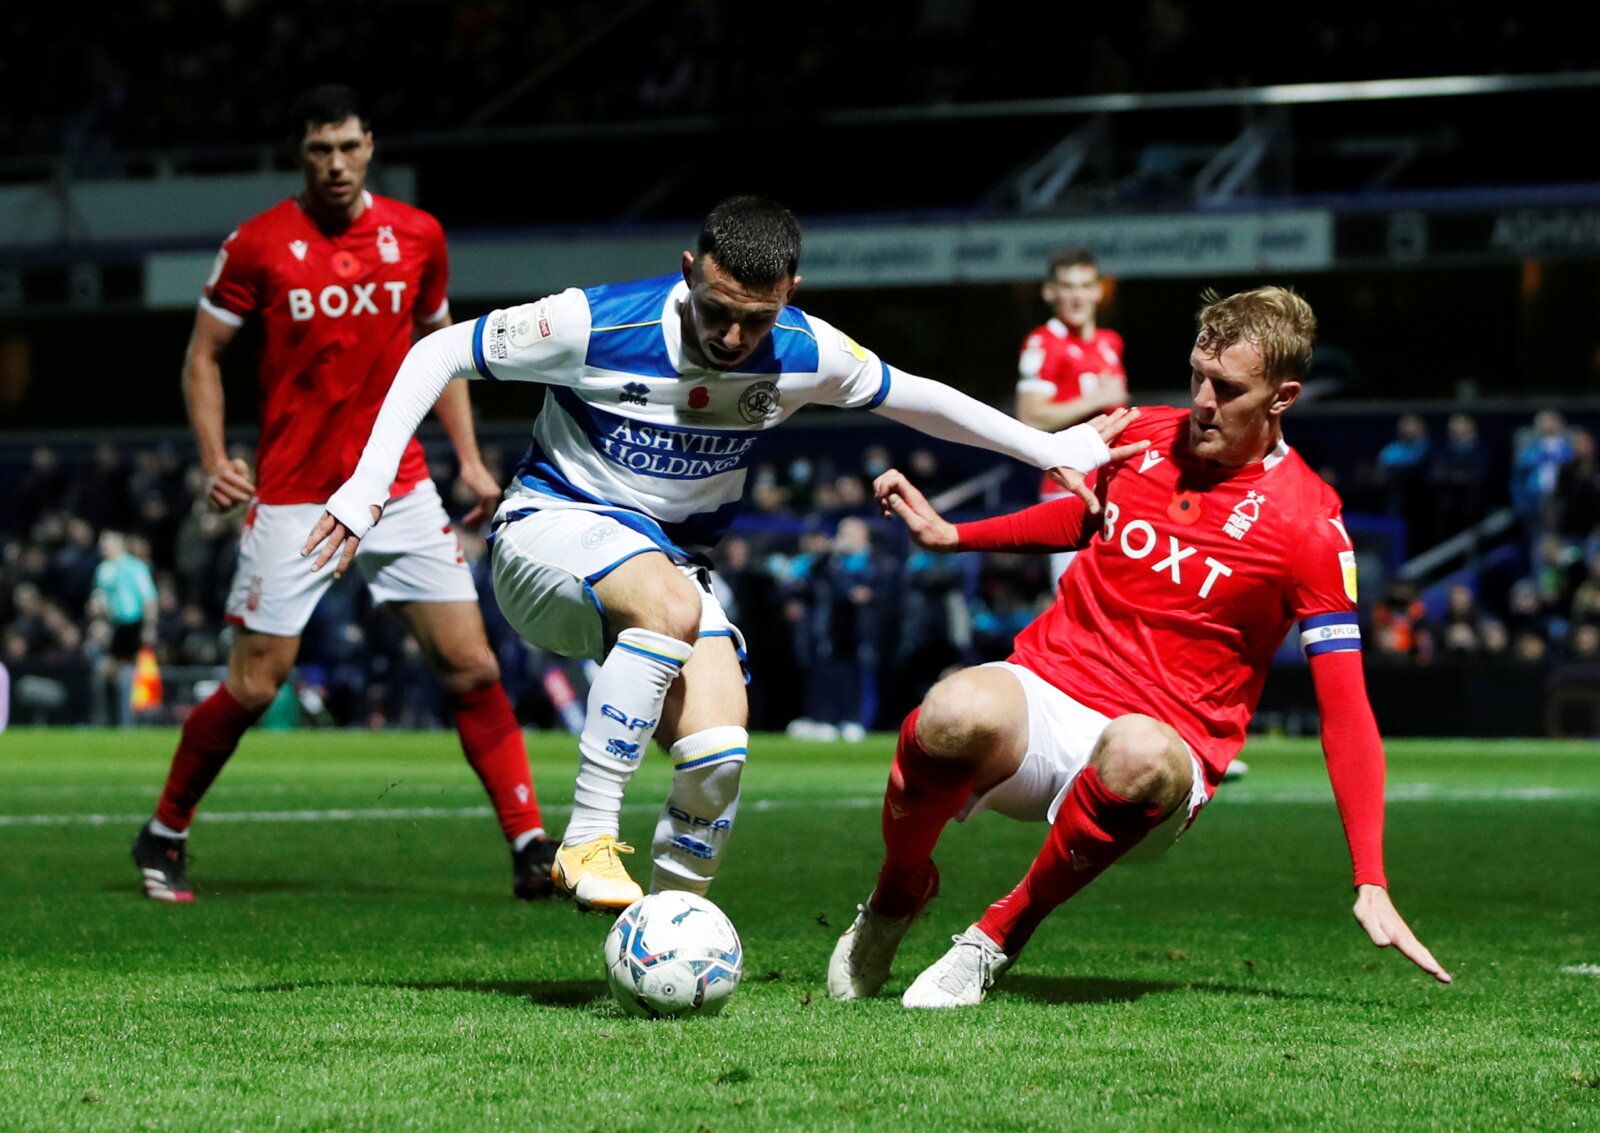 Soccer Football - Championship - Queens Park Rangers v Nottingham Forest - Loftus Road, London, Britain - October 29, 2021  Queens Park Rangers' Ilias Chair in action with Nottingham Forest's Joe Worrall   Action Images/Paul Childs  EDITORIAL USE ONLY. No use with unauthorized audio, video, data, fixture lists, club/league logos or 